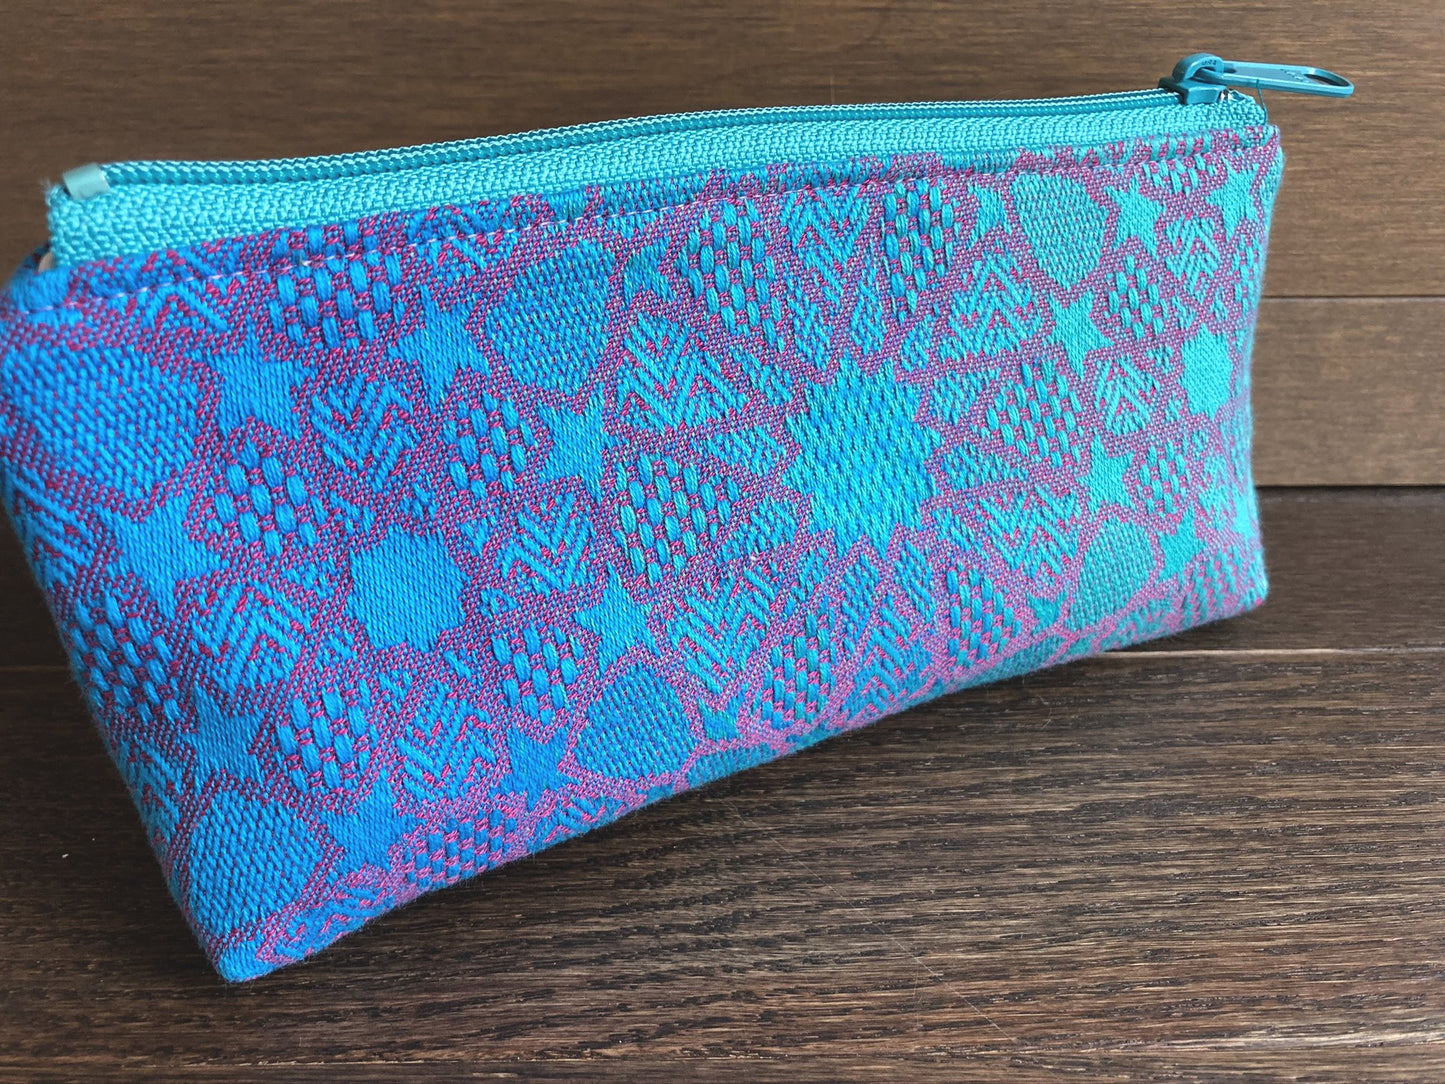 Vibrant Blues and Pinks Jacquard & PUL Lined Compact Zipper Bag